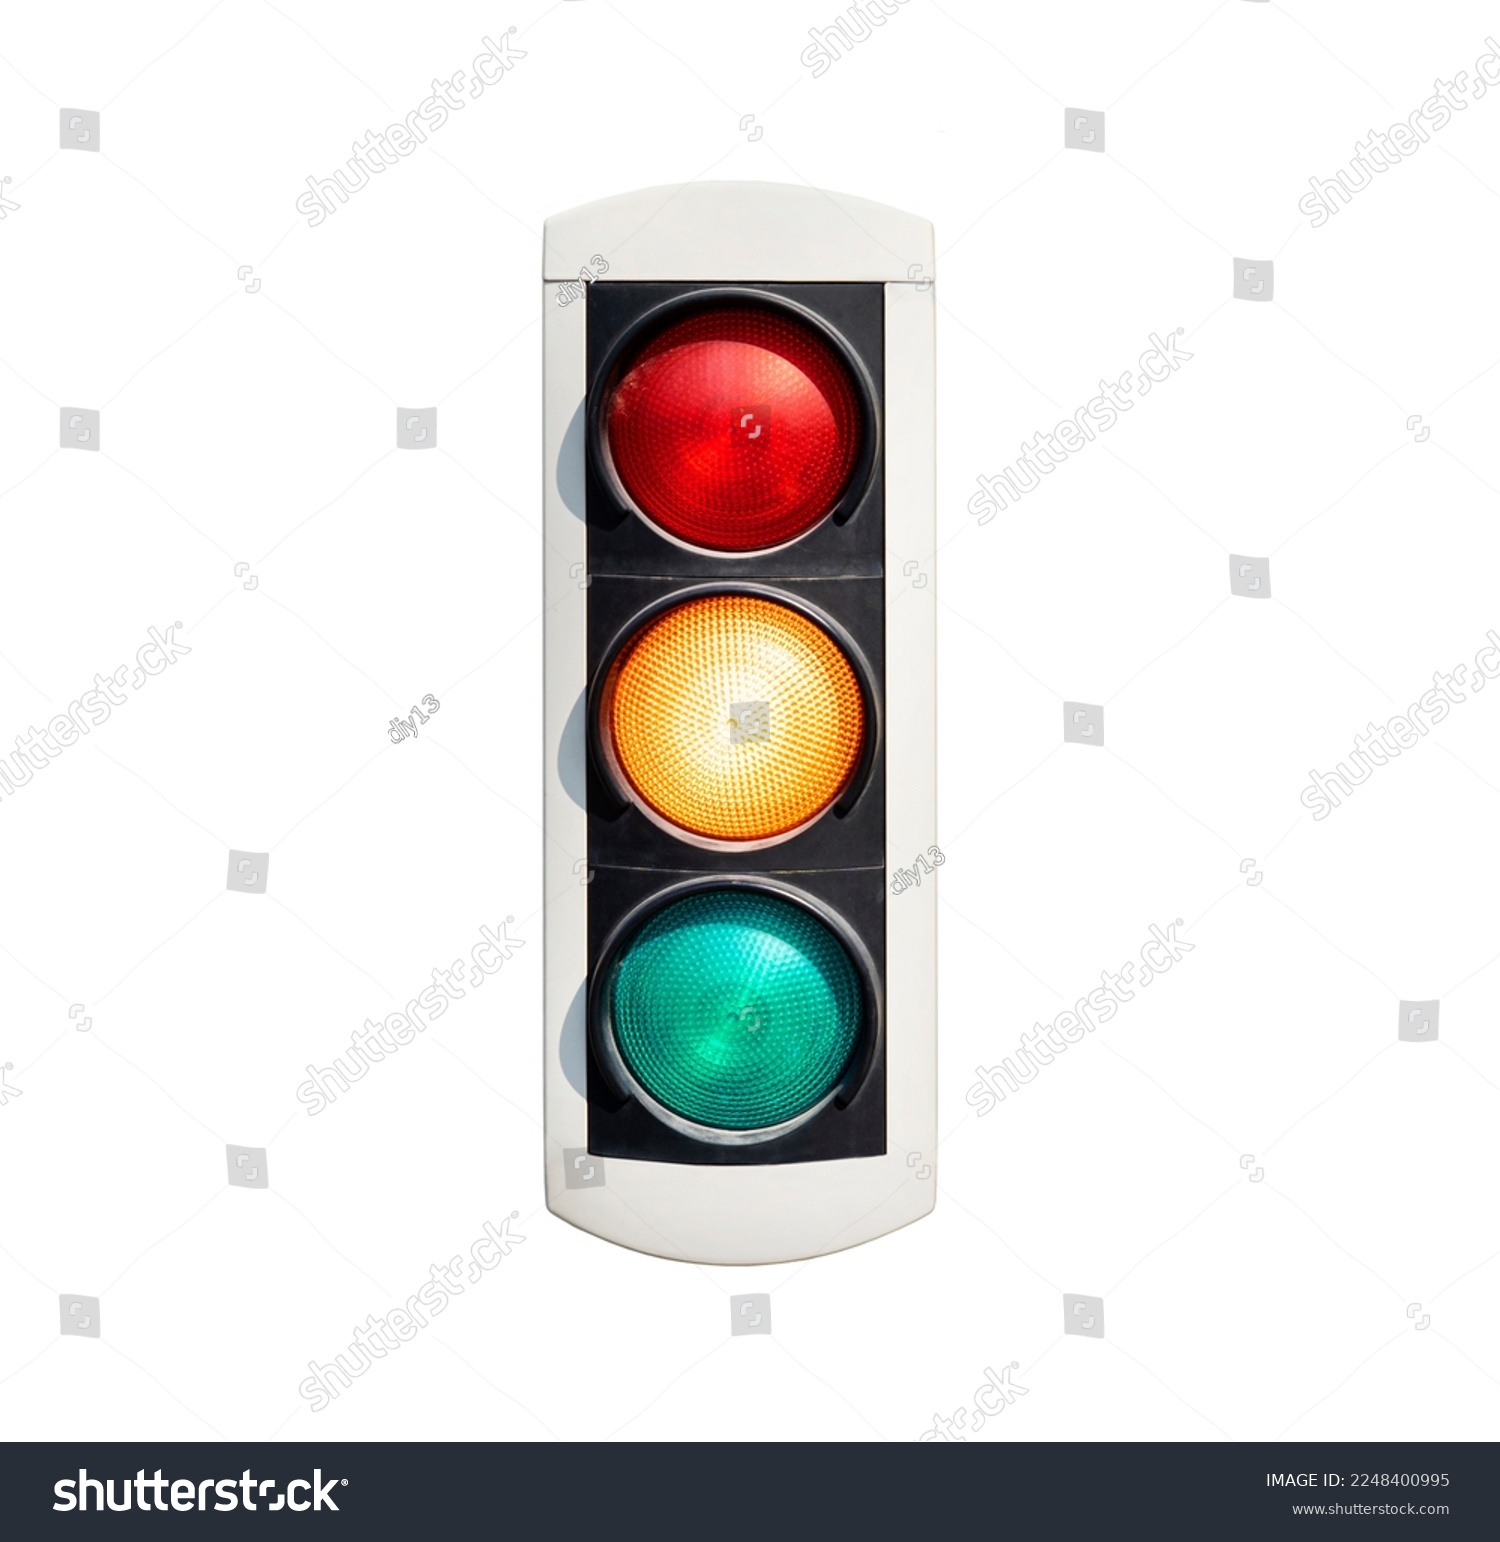 traffic lights isolated on white background all lights on #2248400995